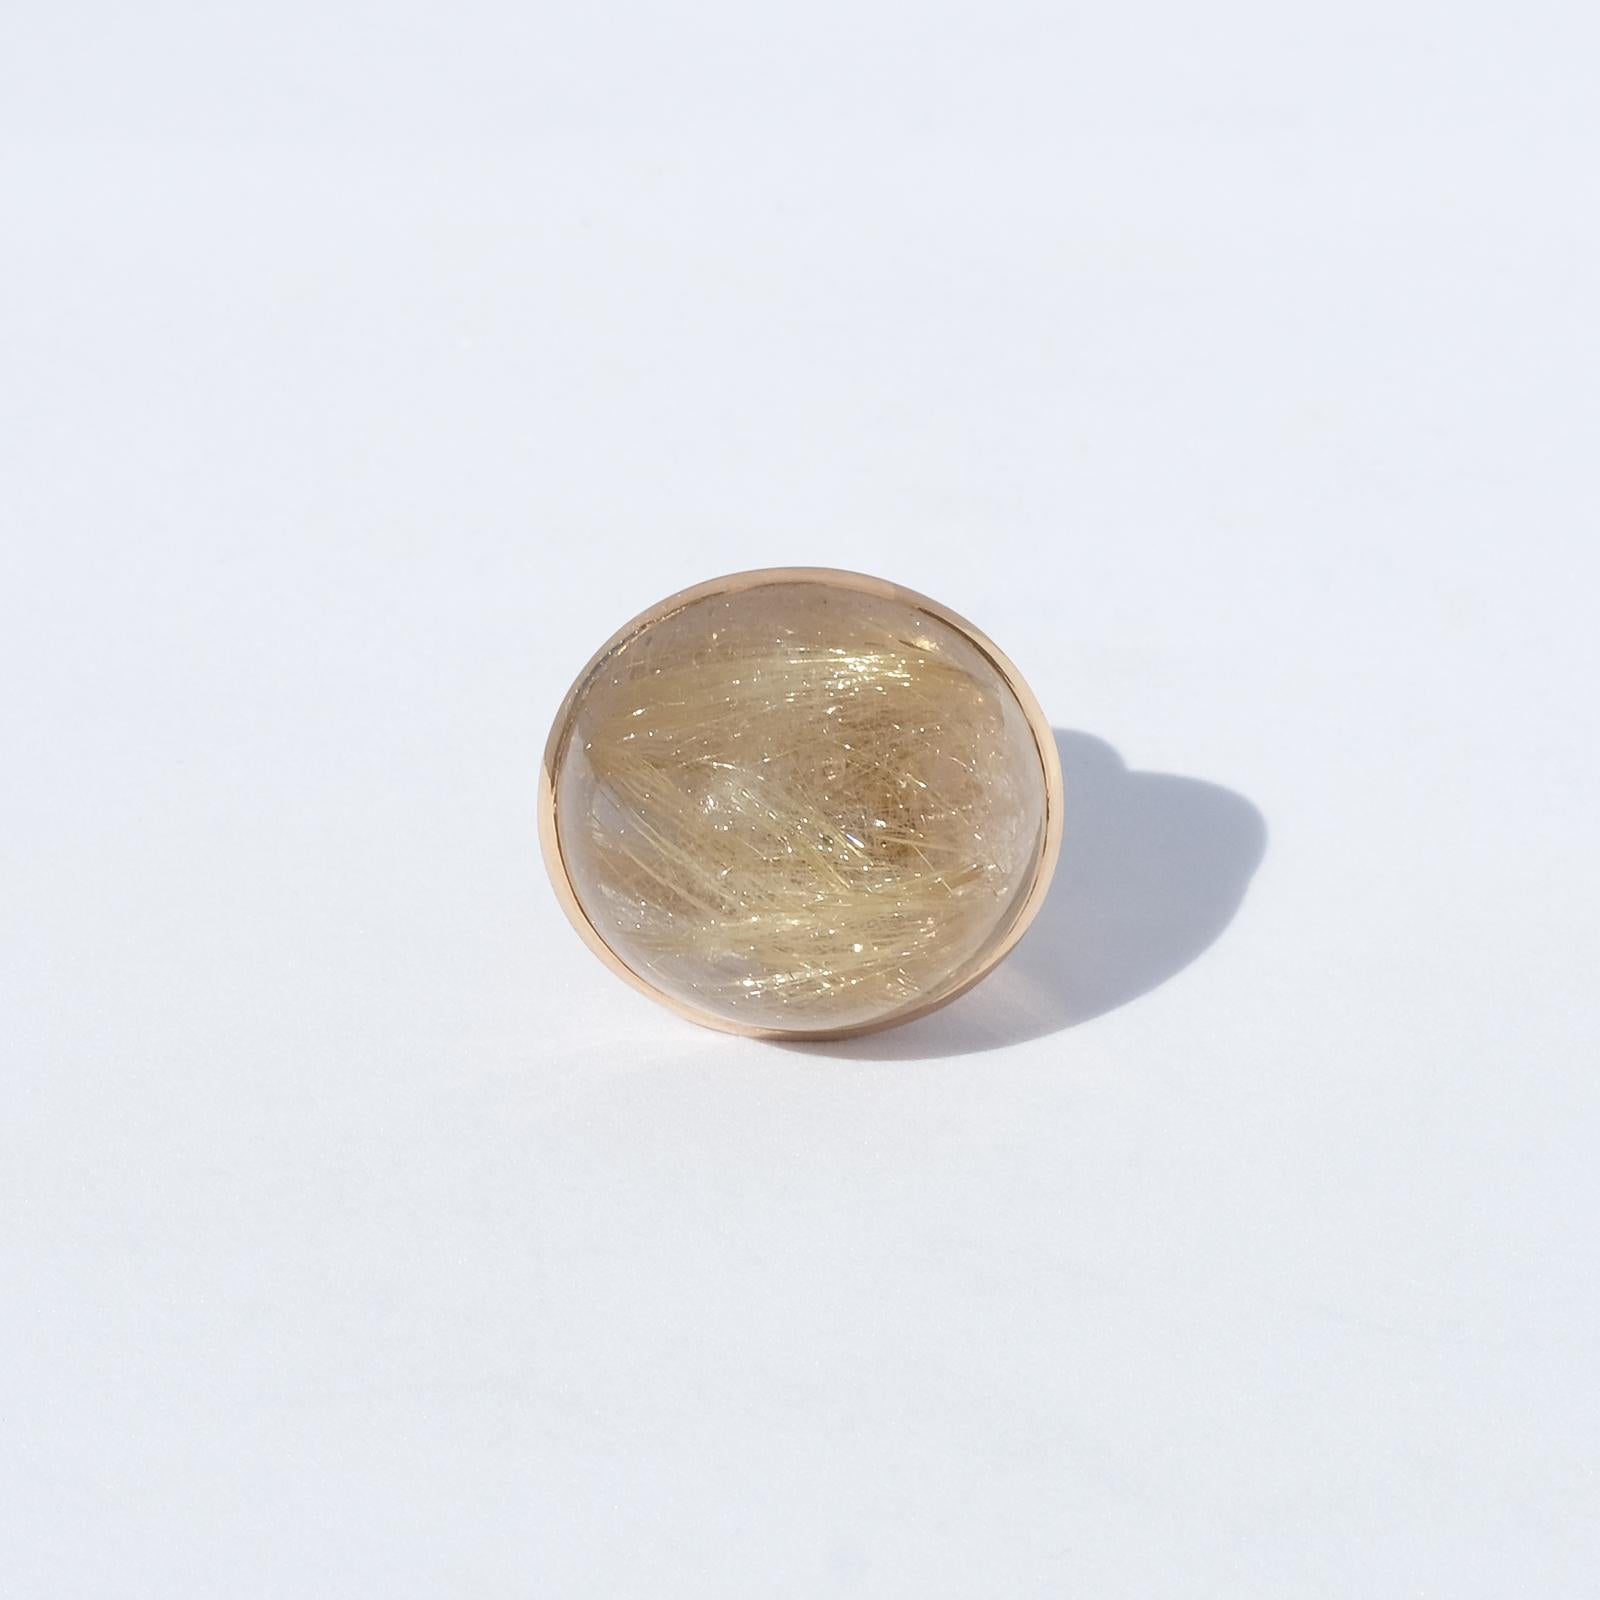 This 14 karat gold ring has a beautiful, clean and large golden rutile cabochon cut quartz stone with very distinct needle-like crystals.

The ring radiates power and attitude and is perfect for both the party and the every day use.